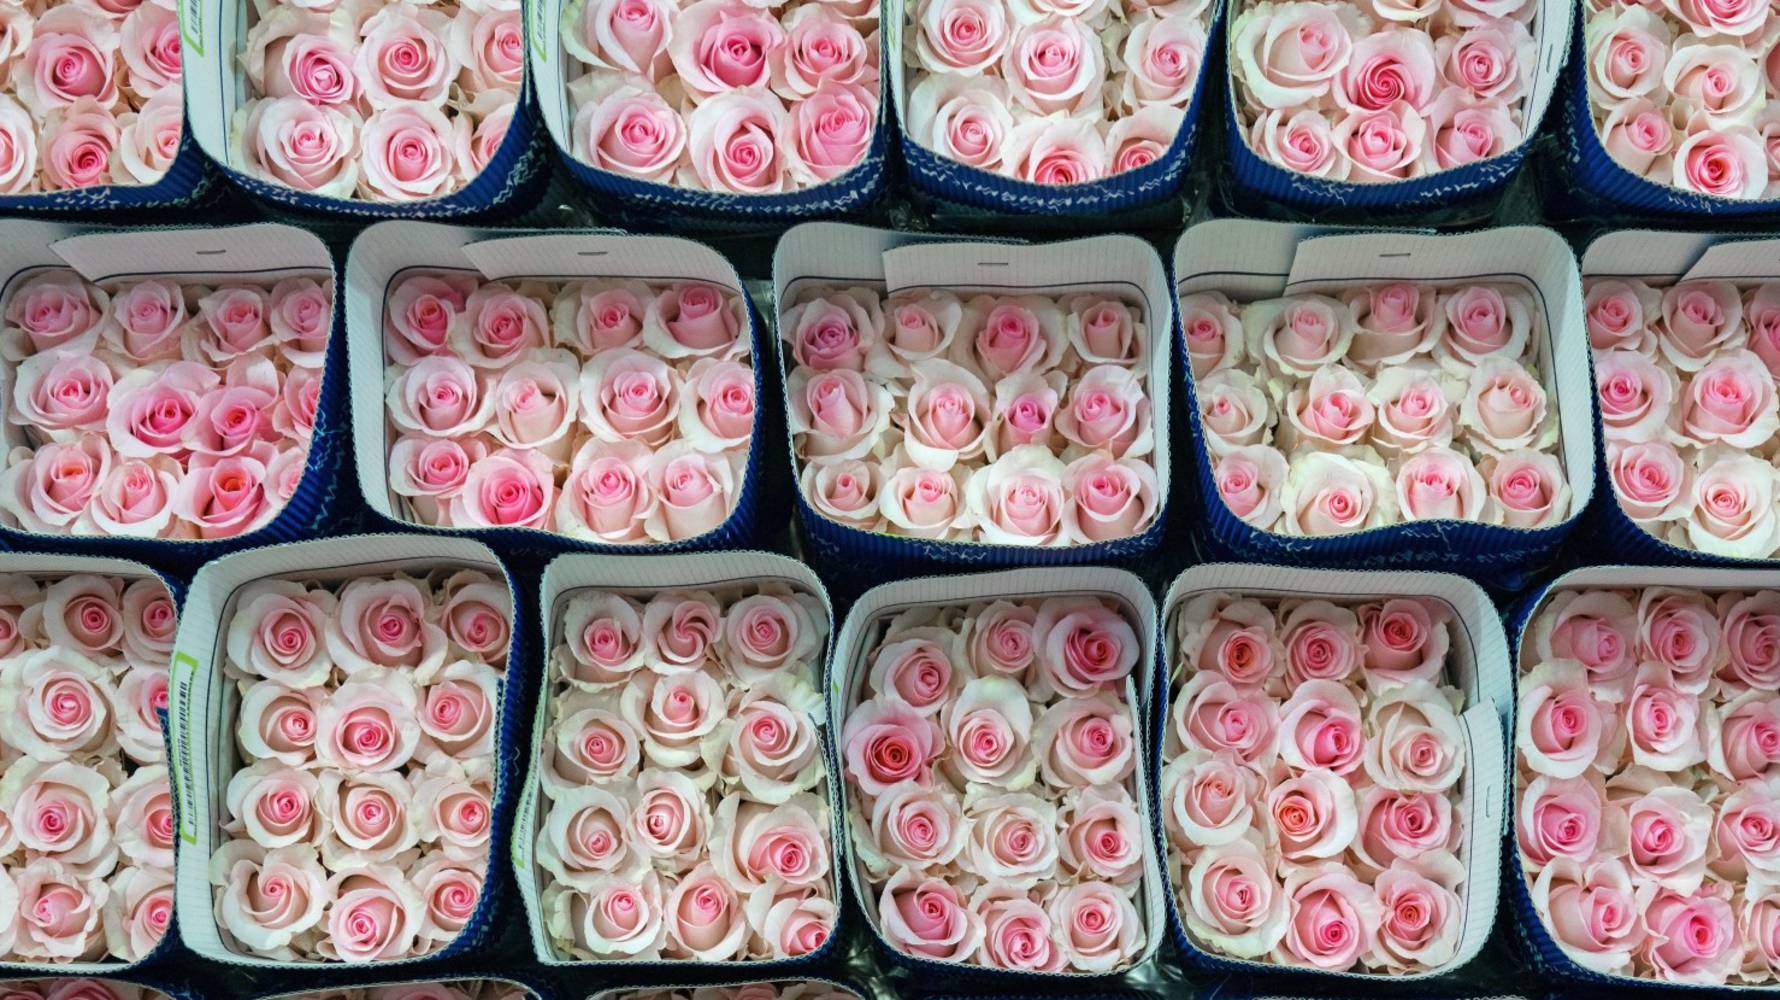 Pink_and_white_roses_packed_for_international_export._The_roses_are_produced_in_Tabacundo_and_Cayambe__north_of_Quito__Ecuador._(Large)